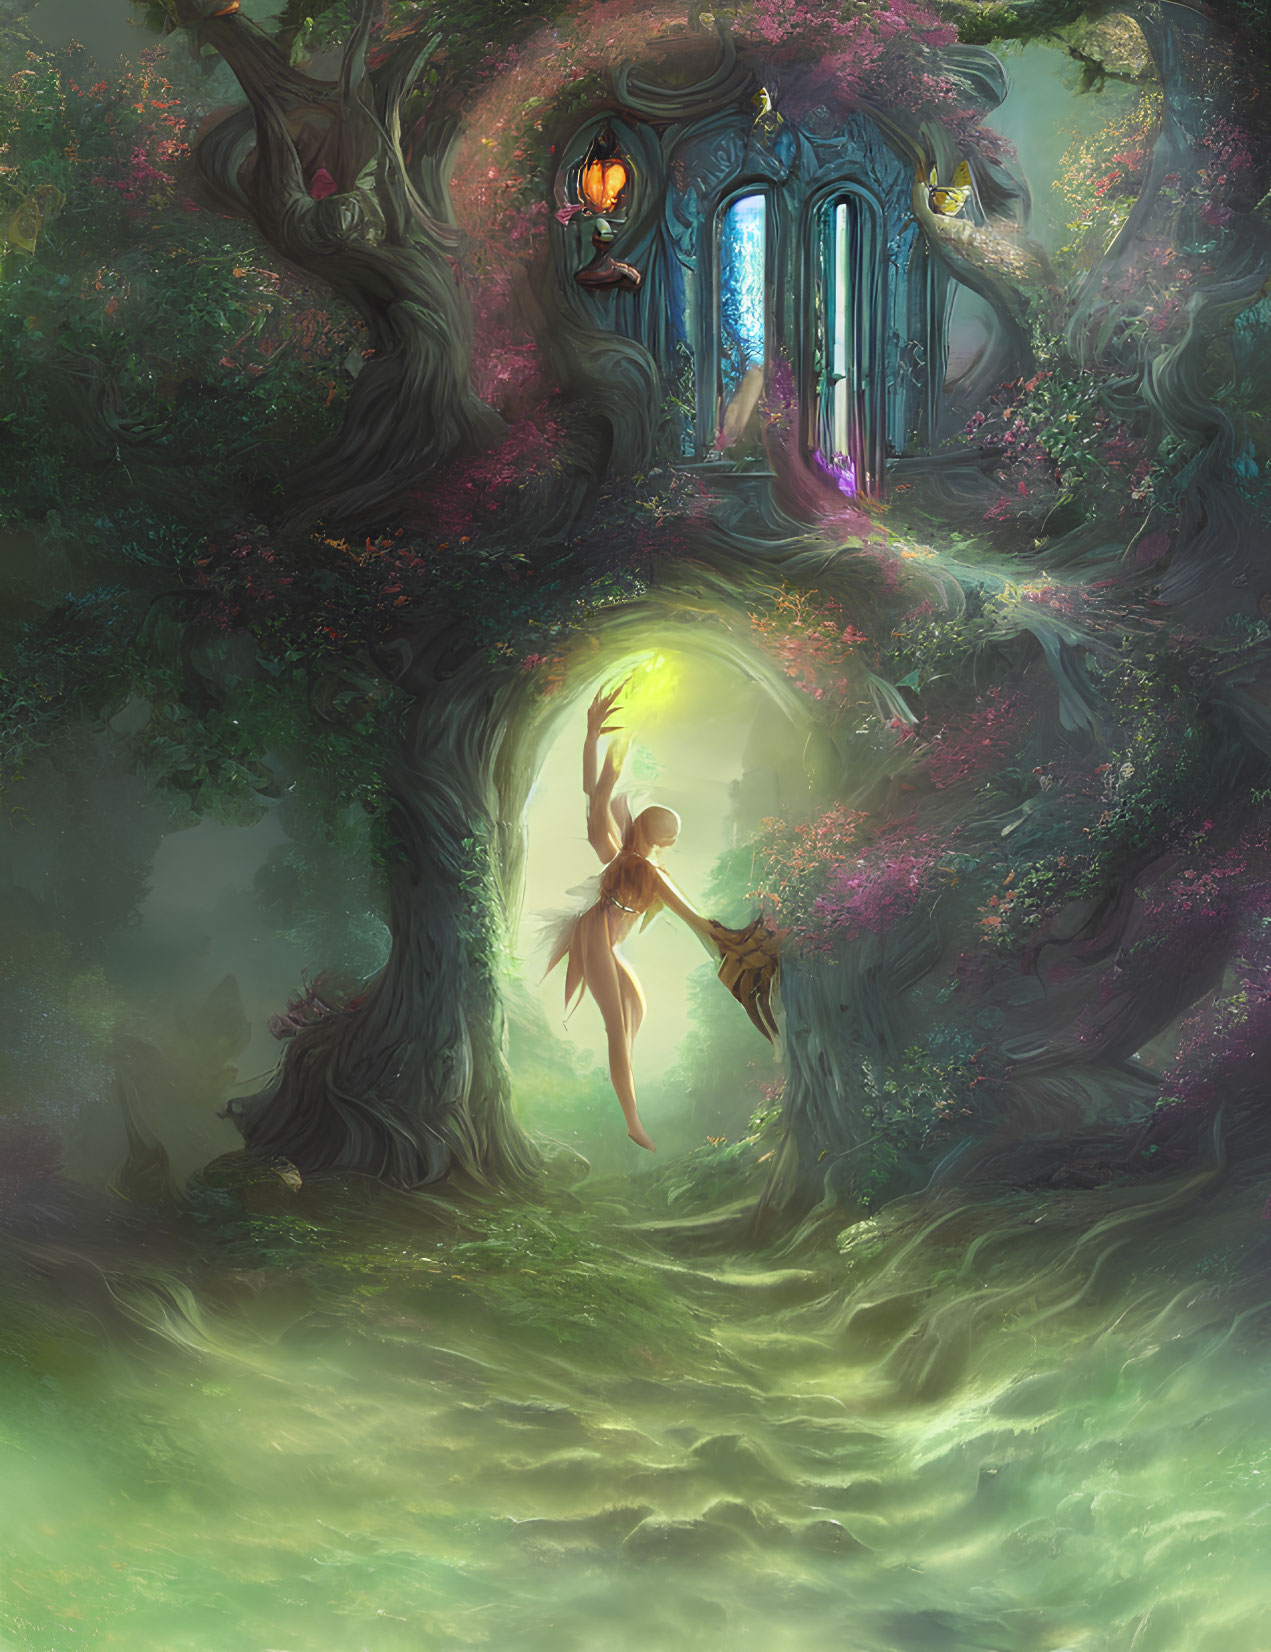 Enchanted forest illustration with fairy and magical tree door